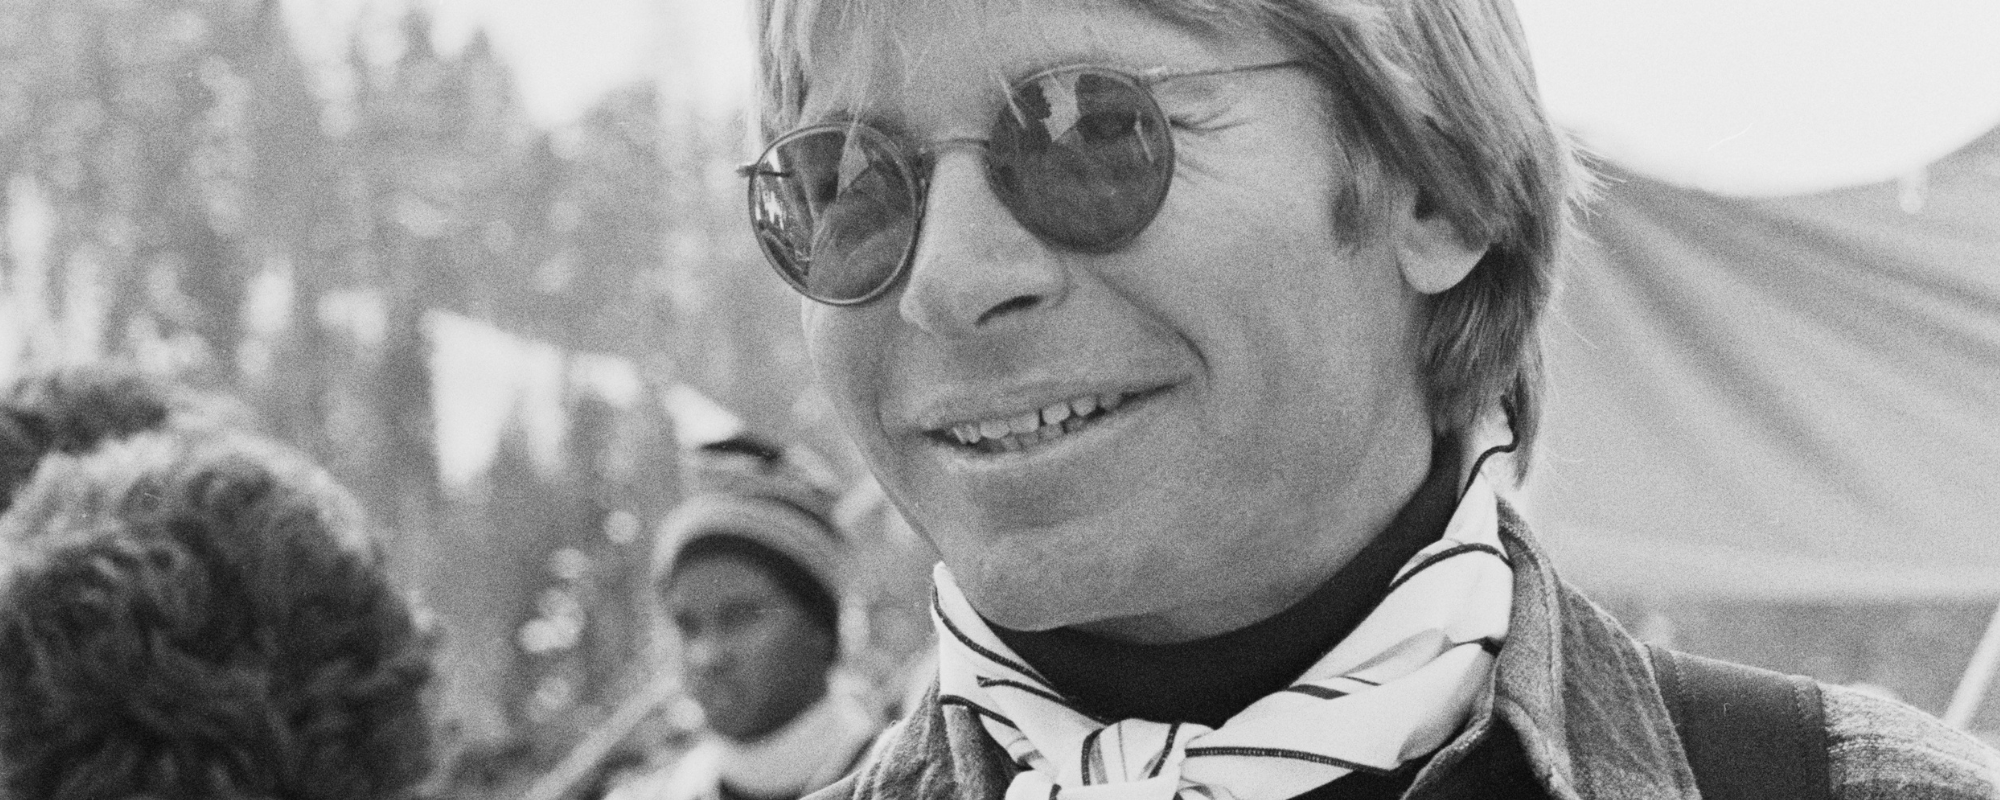 The Meaning Behind John Denver’s Iconic Love Song, “Annie’s Song”